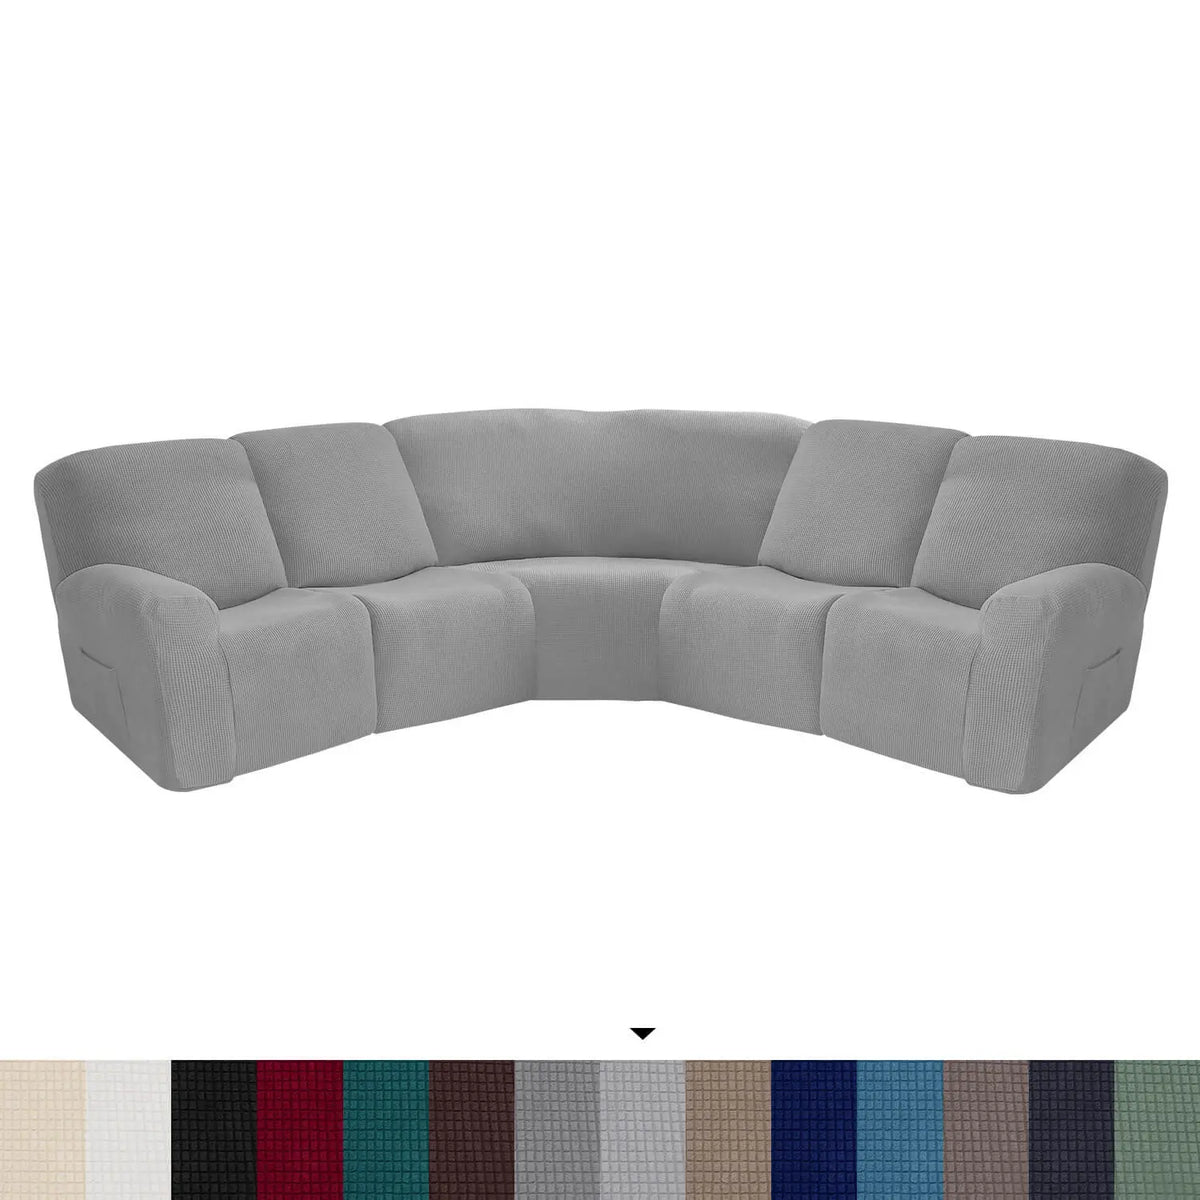 Crfatop L Shape Sectional Recliner Sofa Covers Corner Couch Covers New-Grey